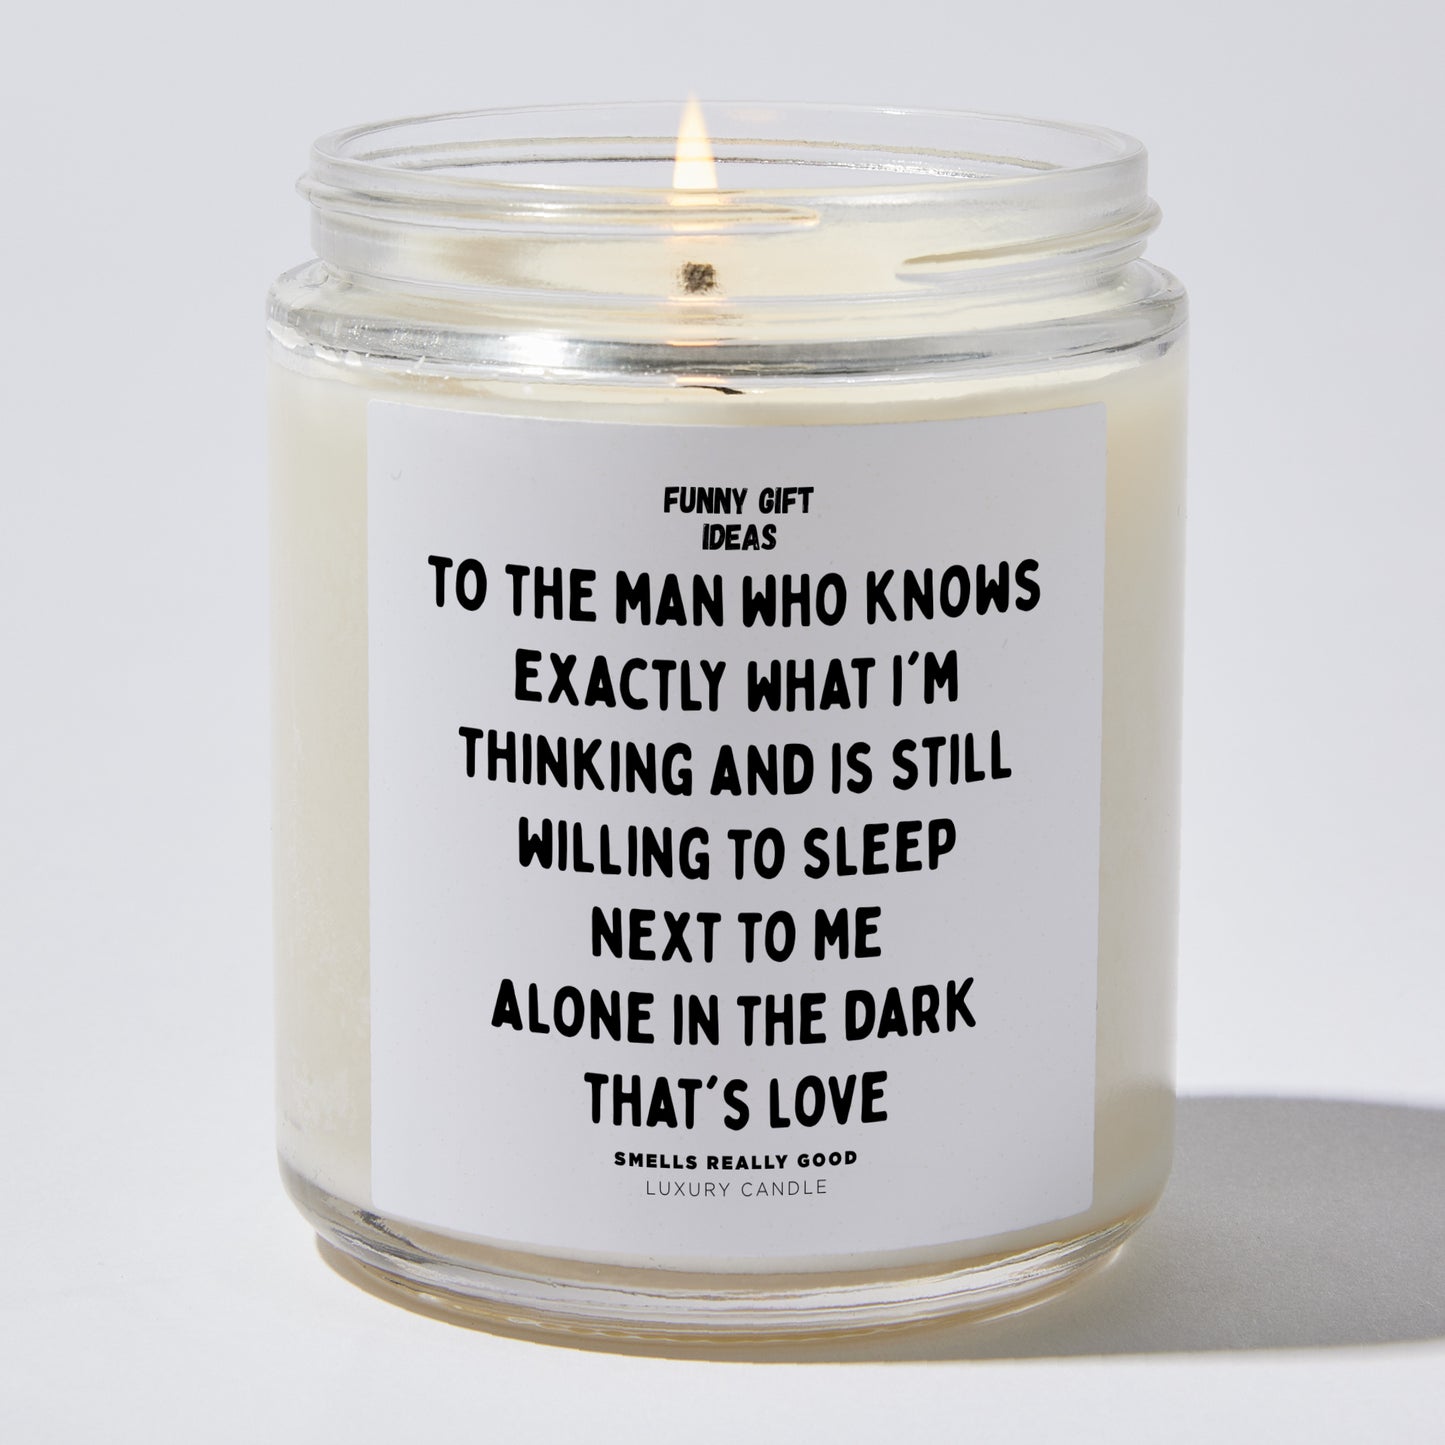 Anniversary Present - To the Man Who Knows Exactly What I'm Thinking and is Still Willing to Sleep Next to Me. Alone. In the Dark. That's Love - Candle